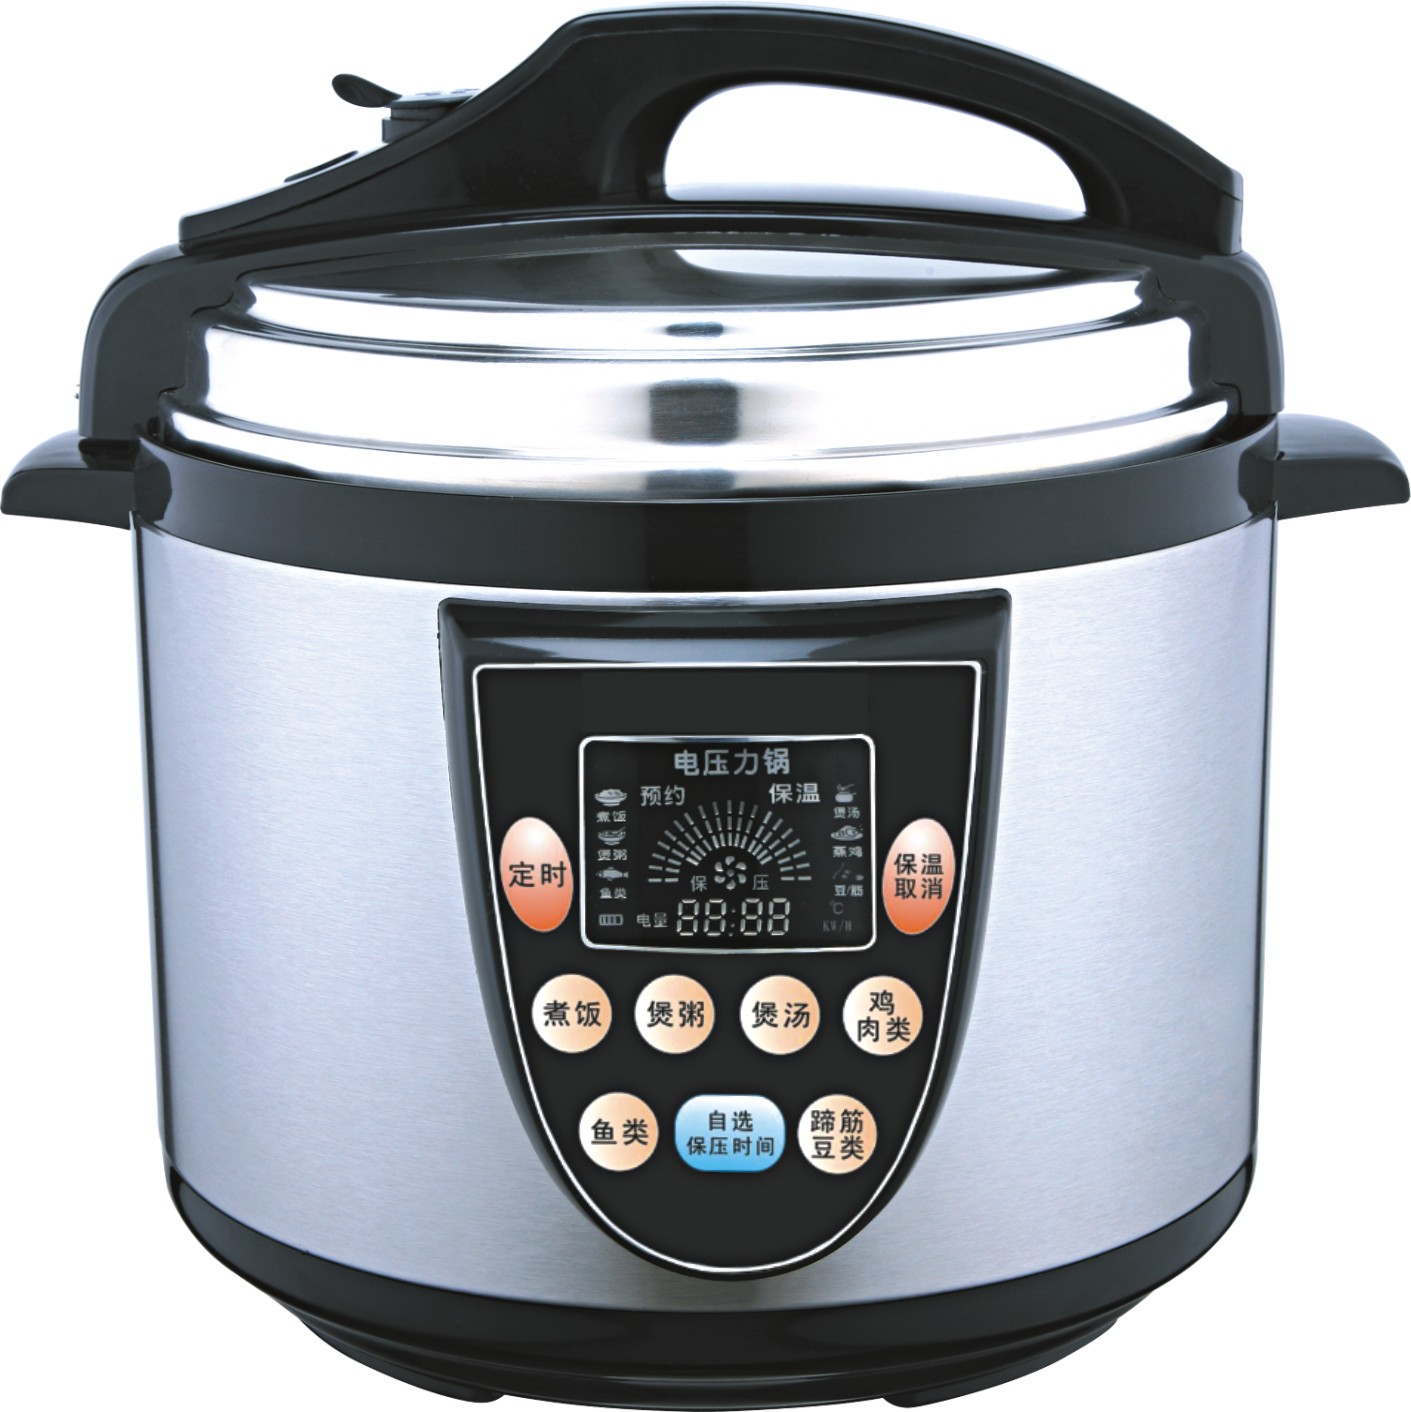 100% safety guarantee high quality electric pressure cooker